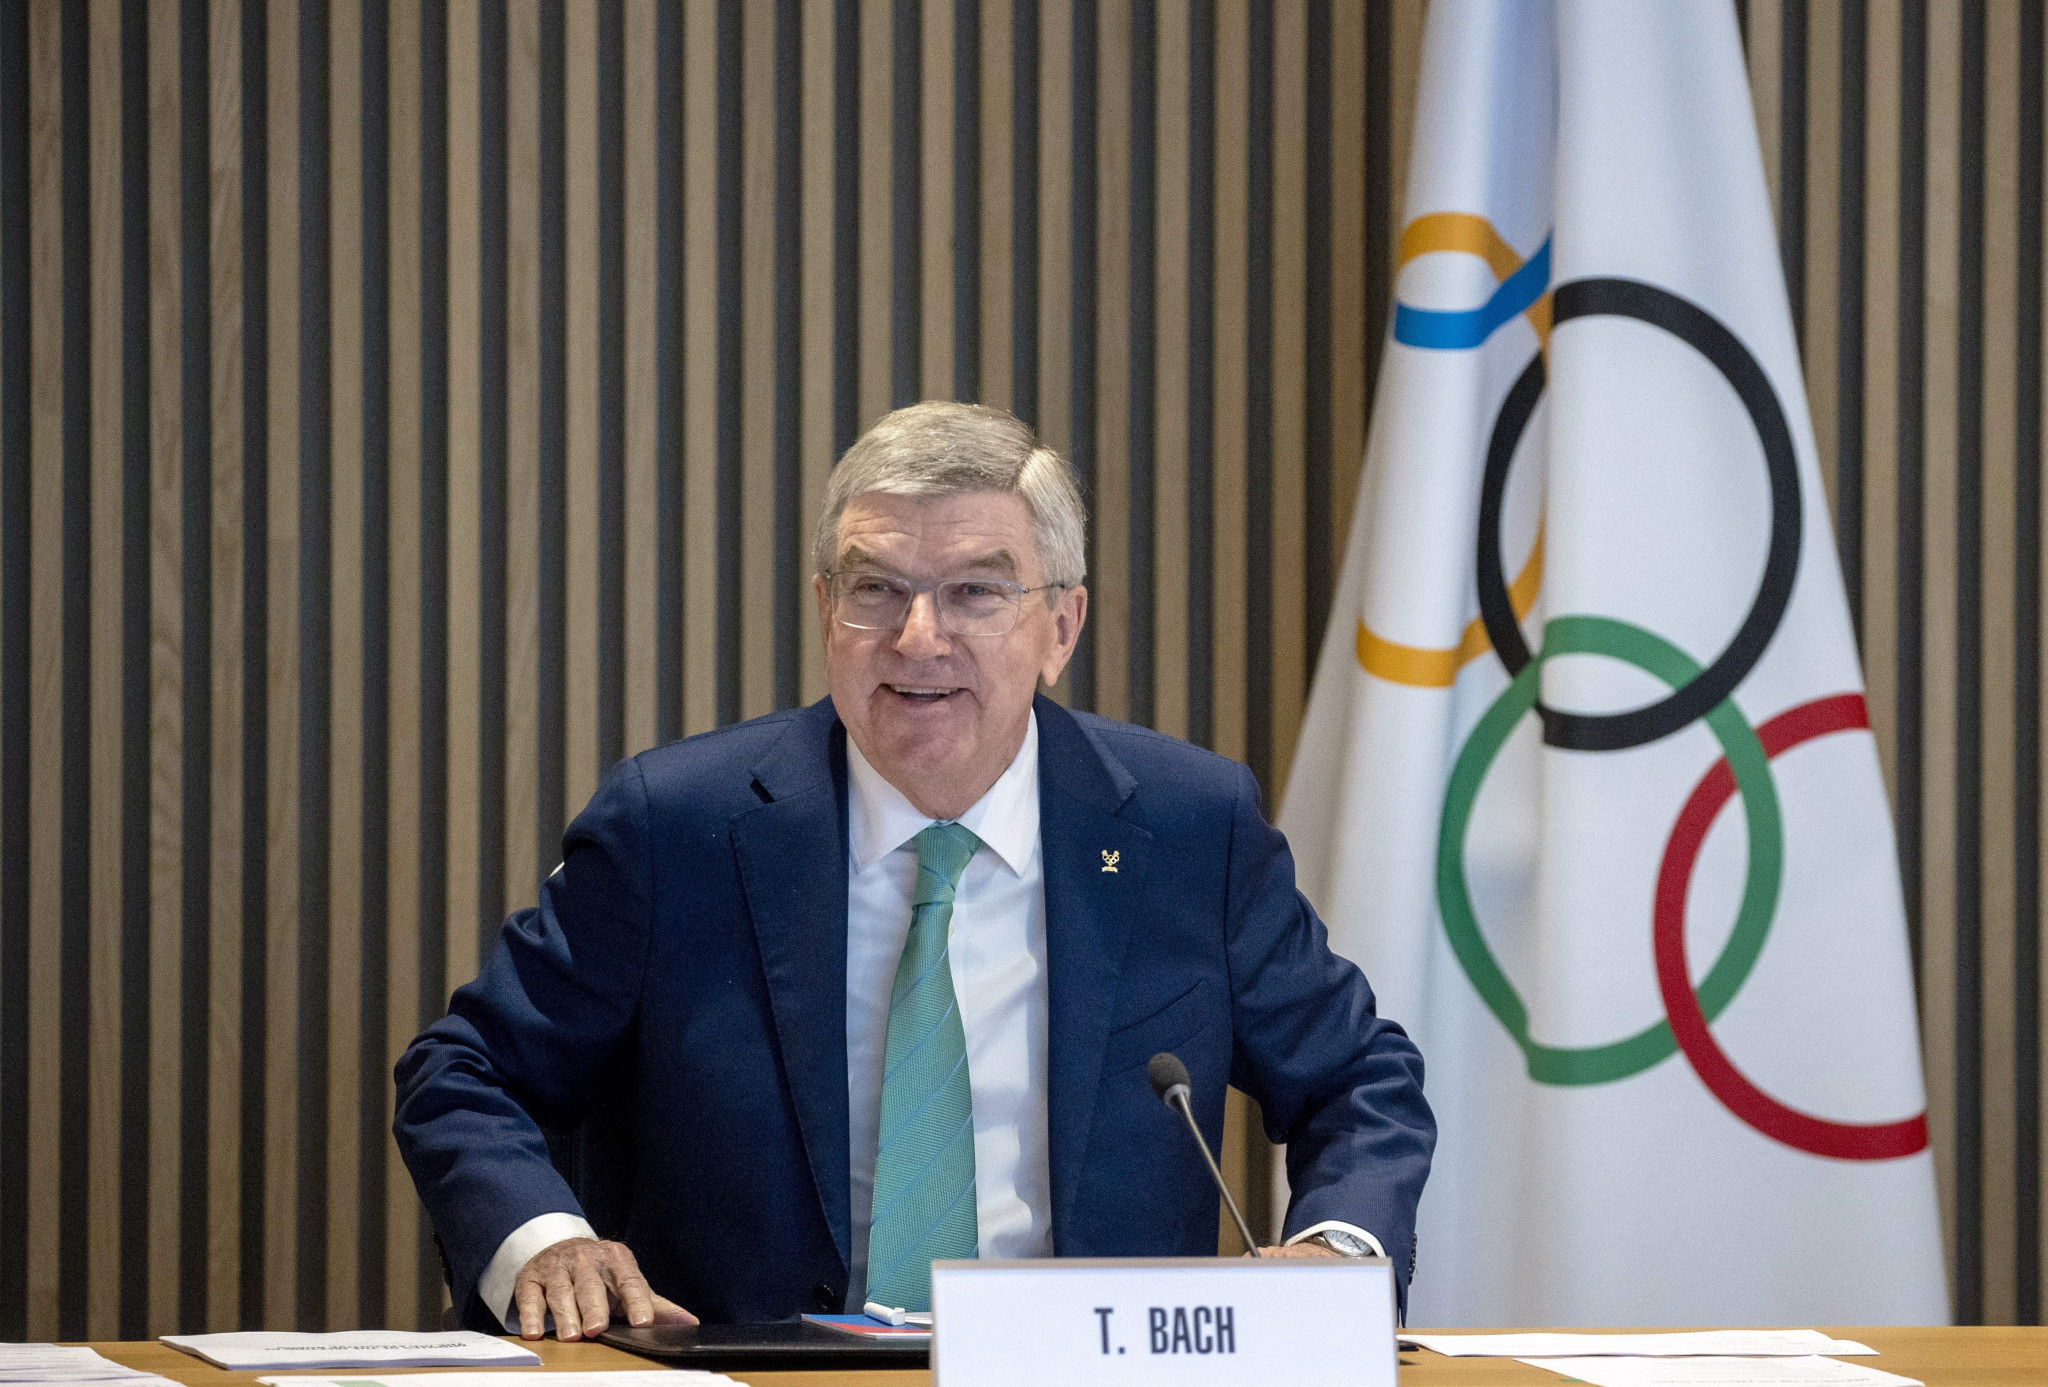 IOC President Thomas Bach has urged the Ukrainian NOC to drop its threat over boycotting the Paris 2024 Olympics ©Getty Images